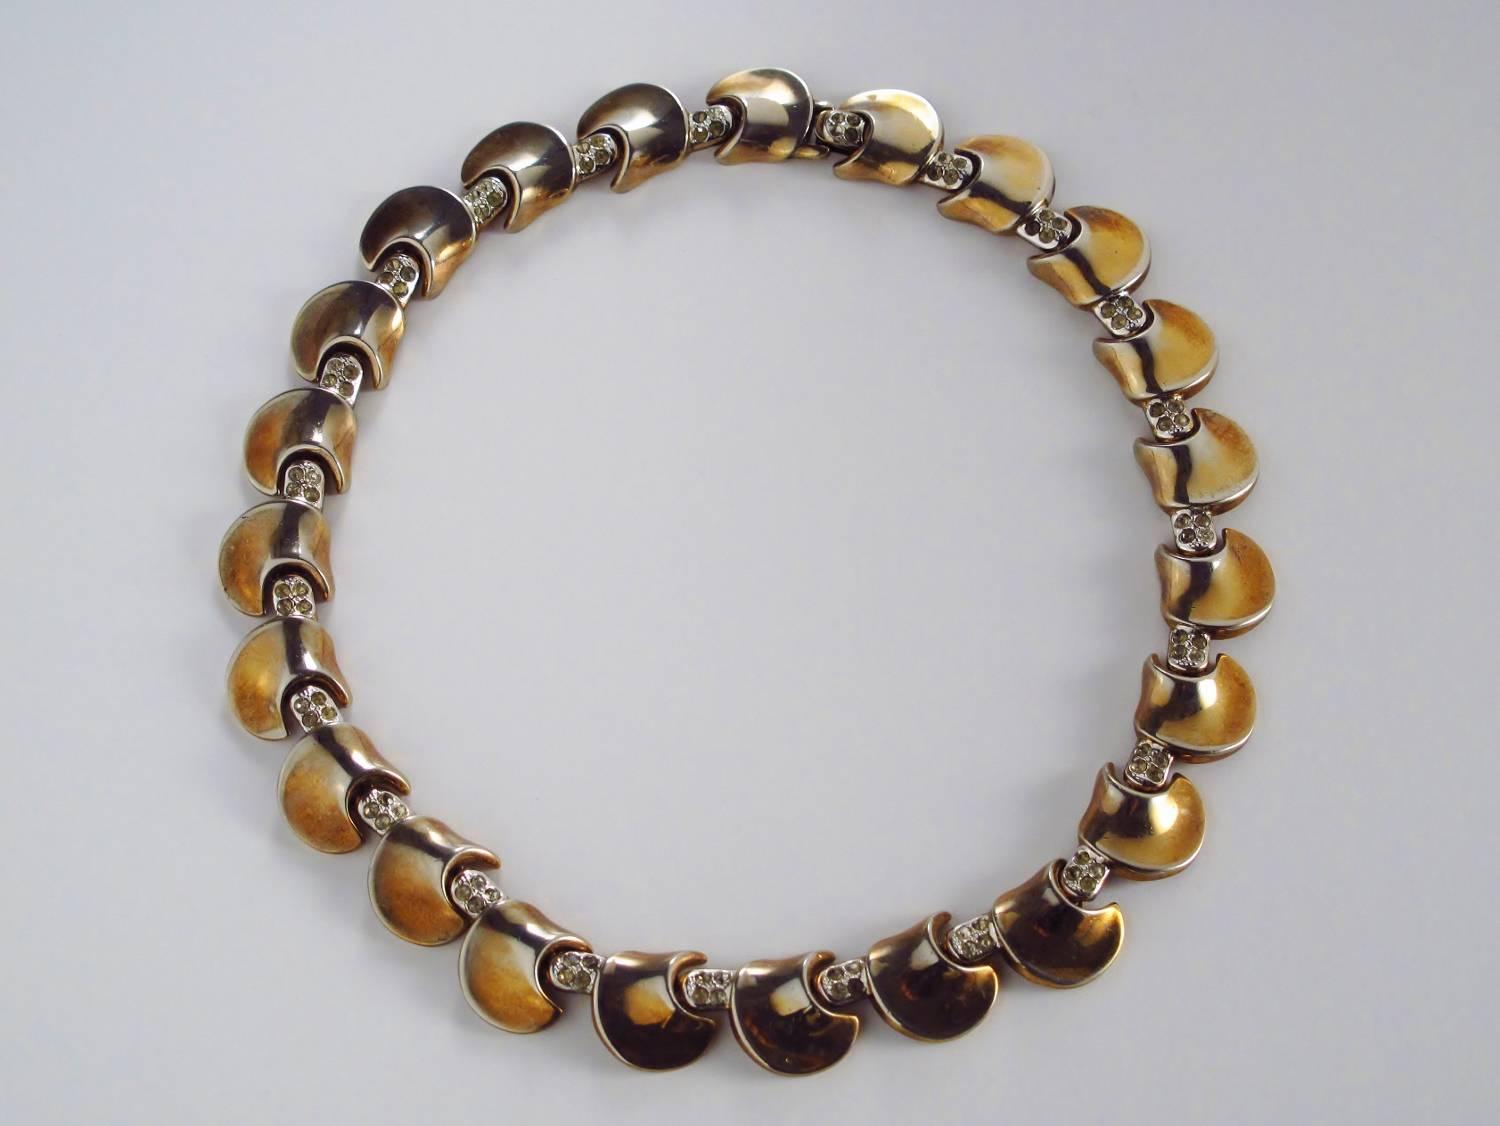 Trifari modernist necklace by Alfred Philippe, circa 1940s, USA. Gold toned choker/collar. Gold-plated pods separated by a group of four rhinestones. Stamped Trifari Des Pat Pend Corp which is a mark from the 1940s. This necklace appeared in this